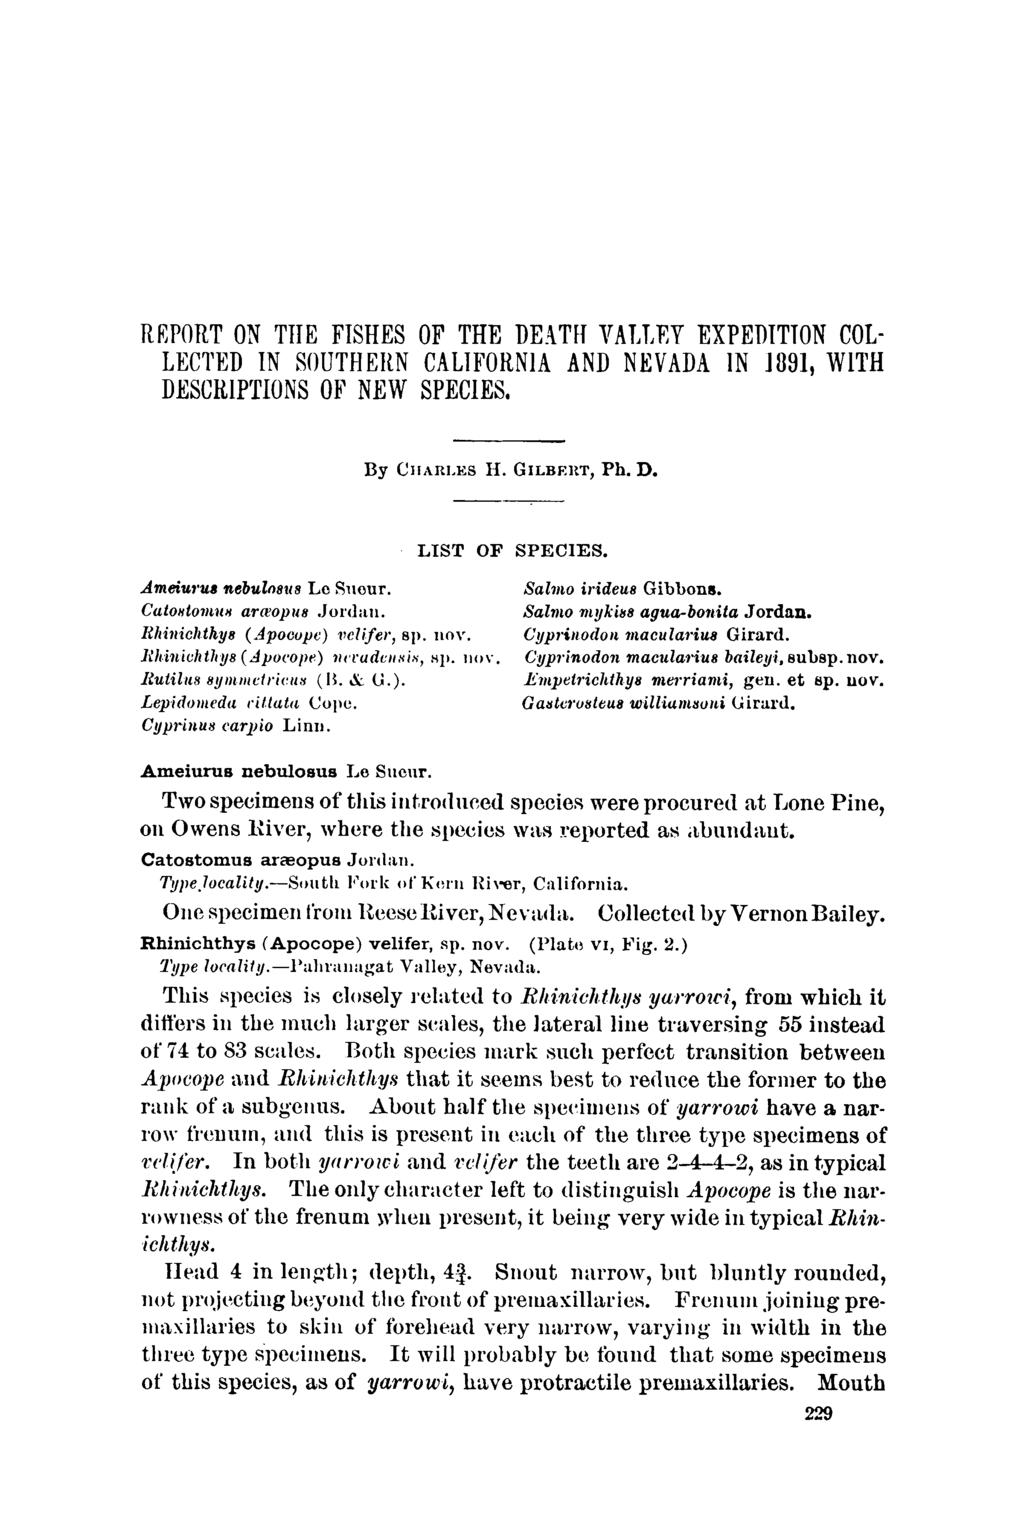 REPORT ON THE FISHES OF THE DEATH VALLEY EXPEDITION COL LECTED IN SOUTHERN CALIFORNIA AND NEVADA IN J891, WITH DESCRIPTIONS OF NEW SPECIES. By CHARLES H. GILBKRT, Ph.D. LIST OF SPECIES.